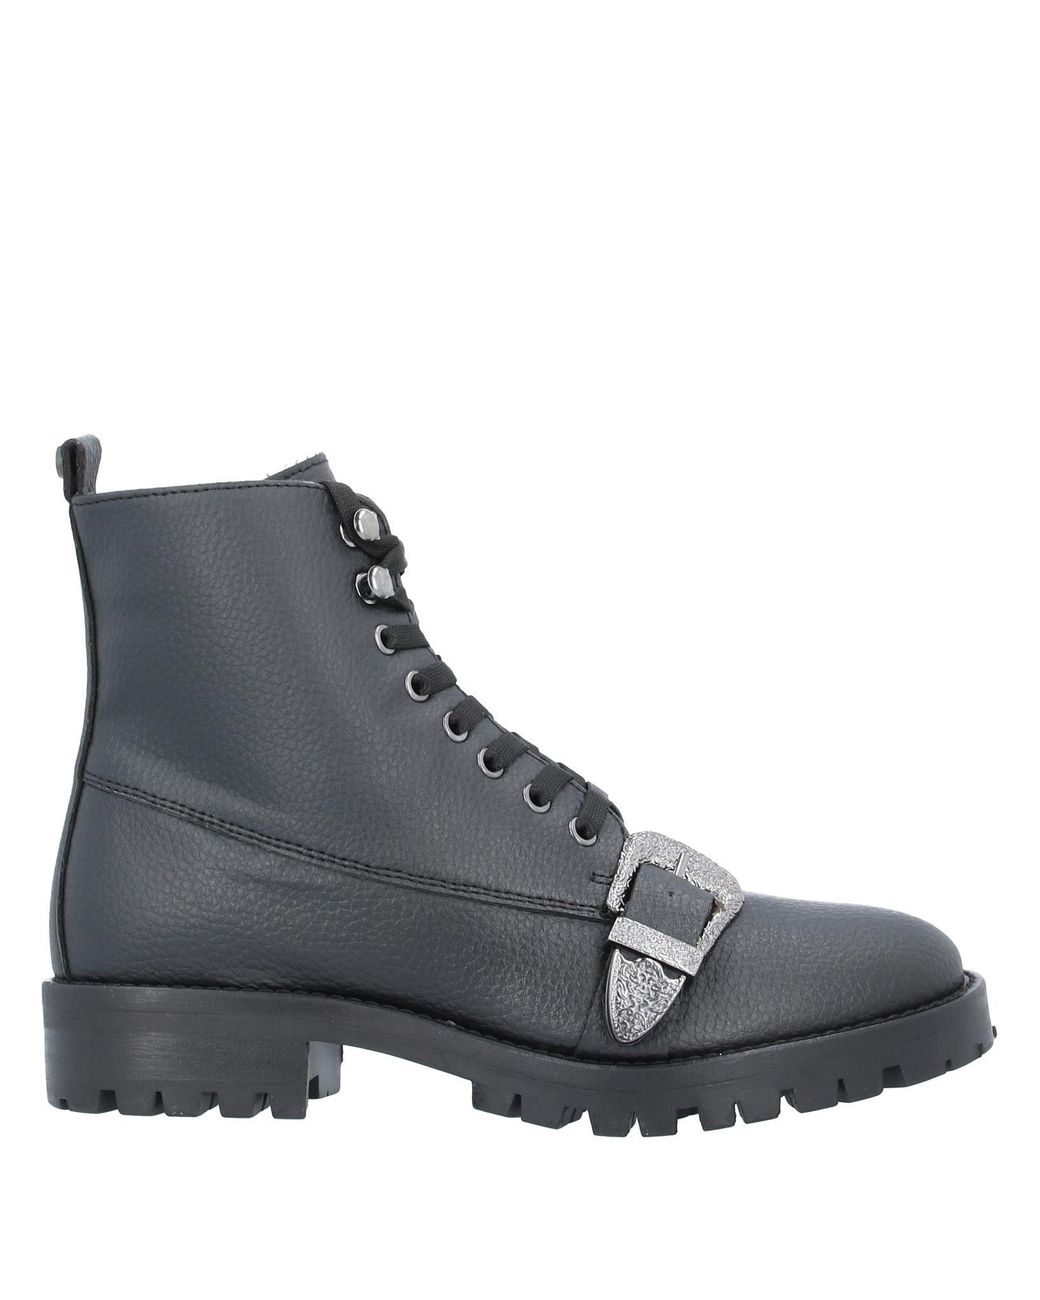 Trussardi Ankle Boots in Black - Lyst